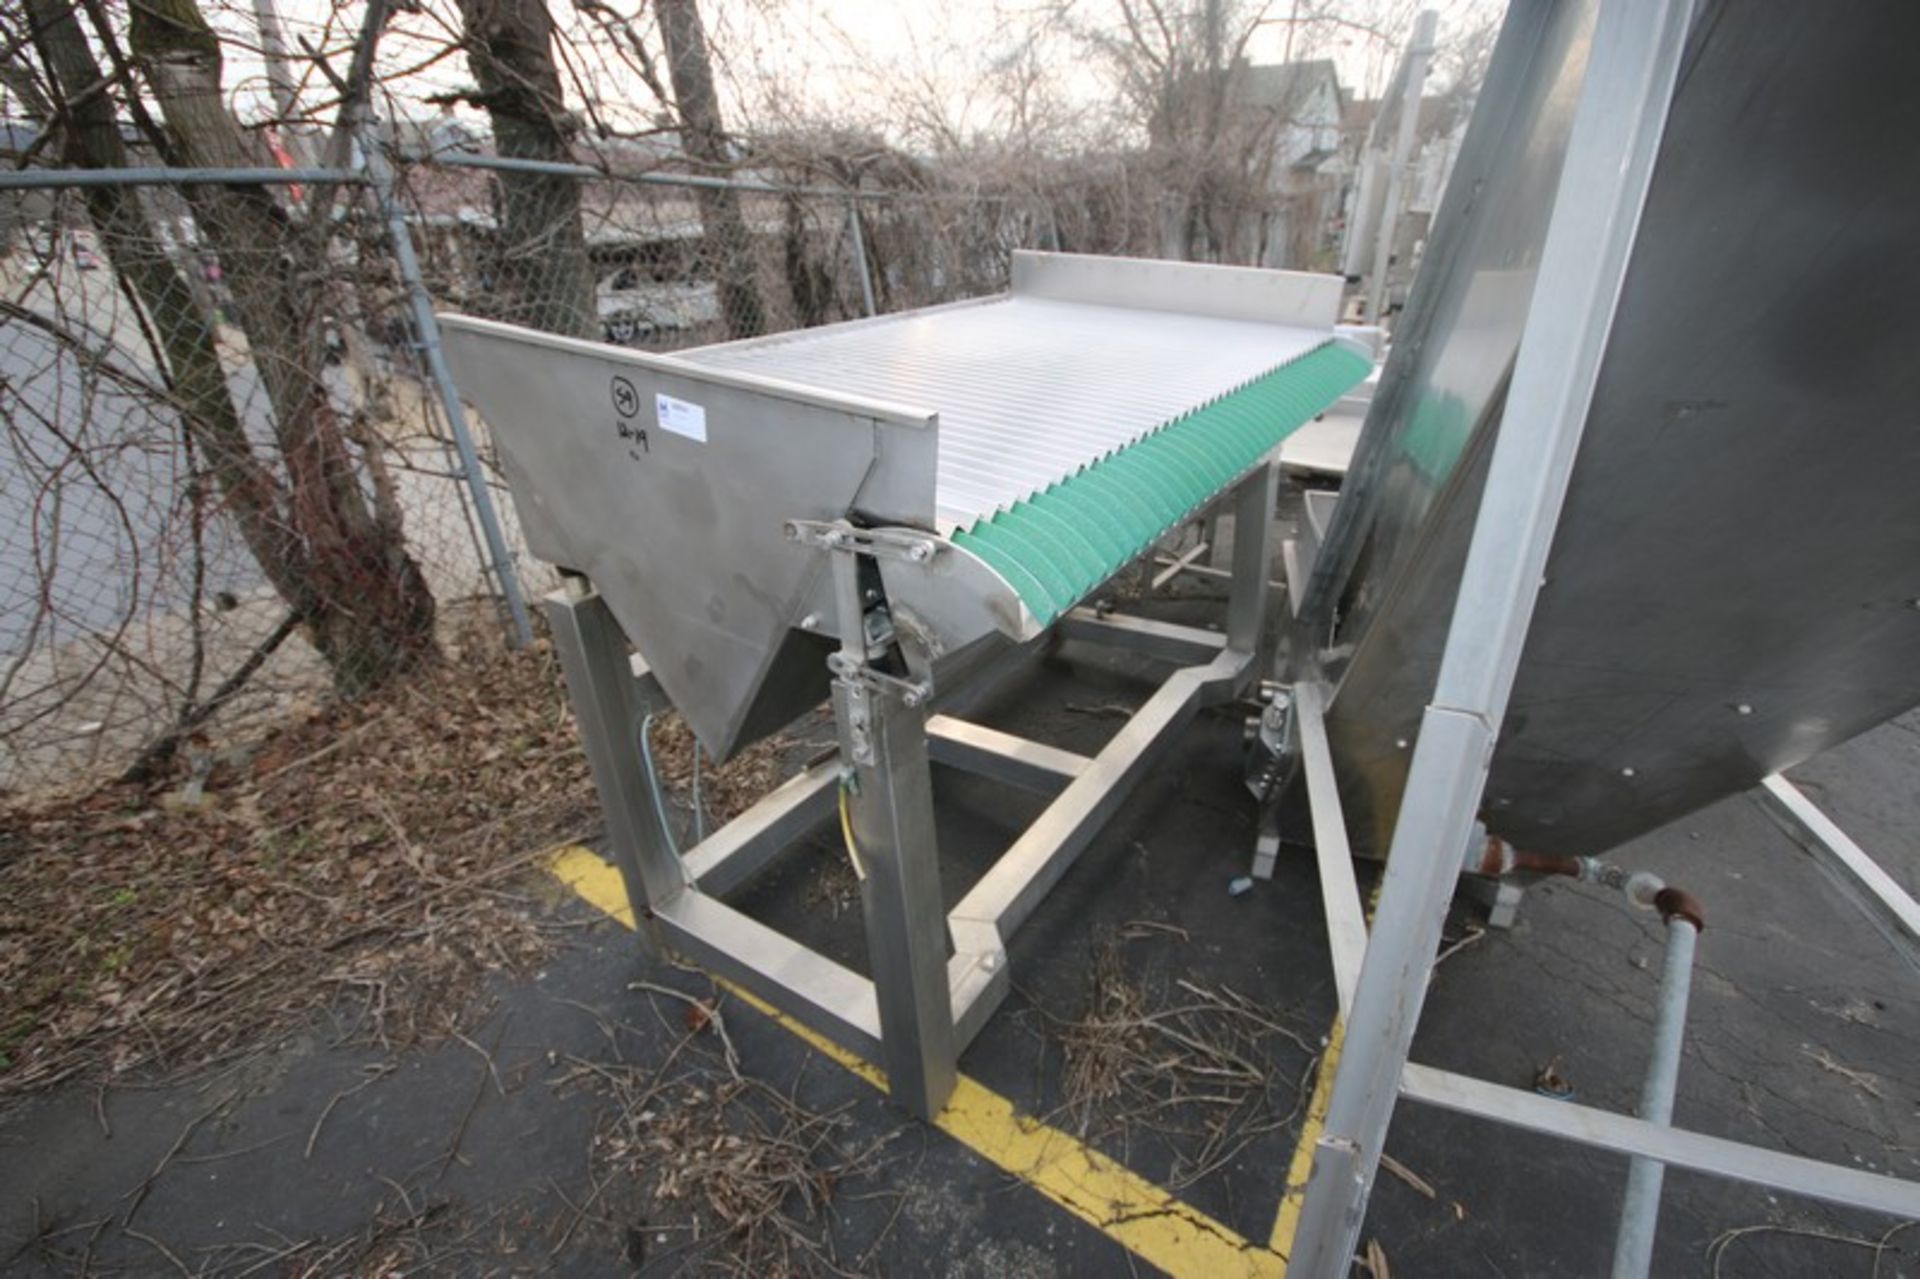 S/S Flume,Overall Dims.: Aprox. 78" L x 43" W x 52" H, Mounted on S/S Frame (INV#68824) (Located